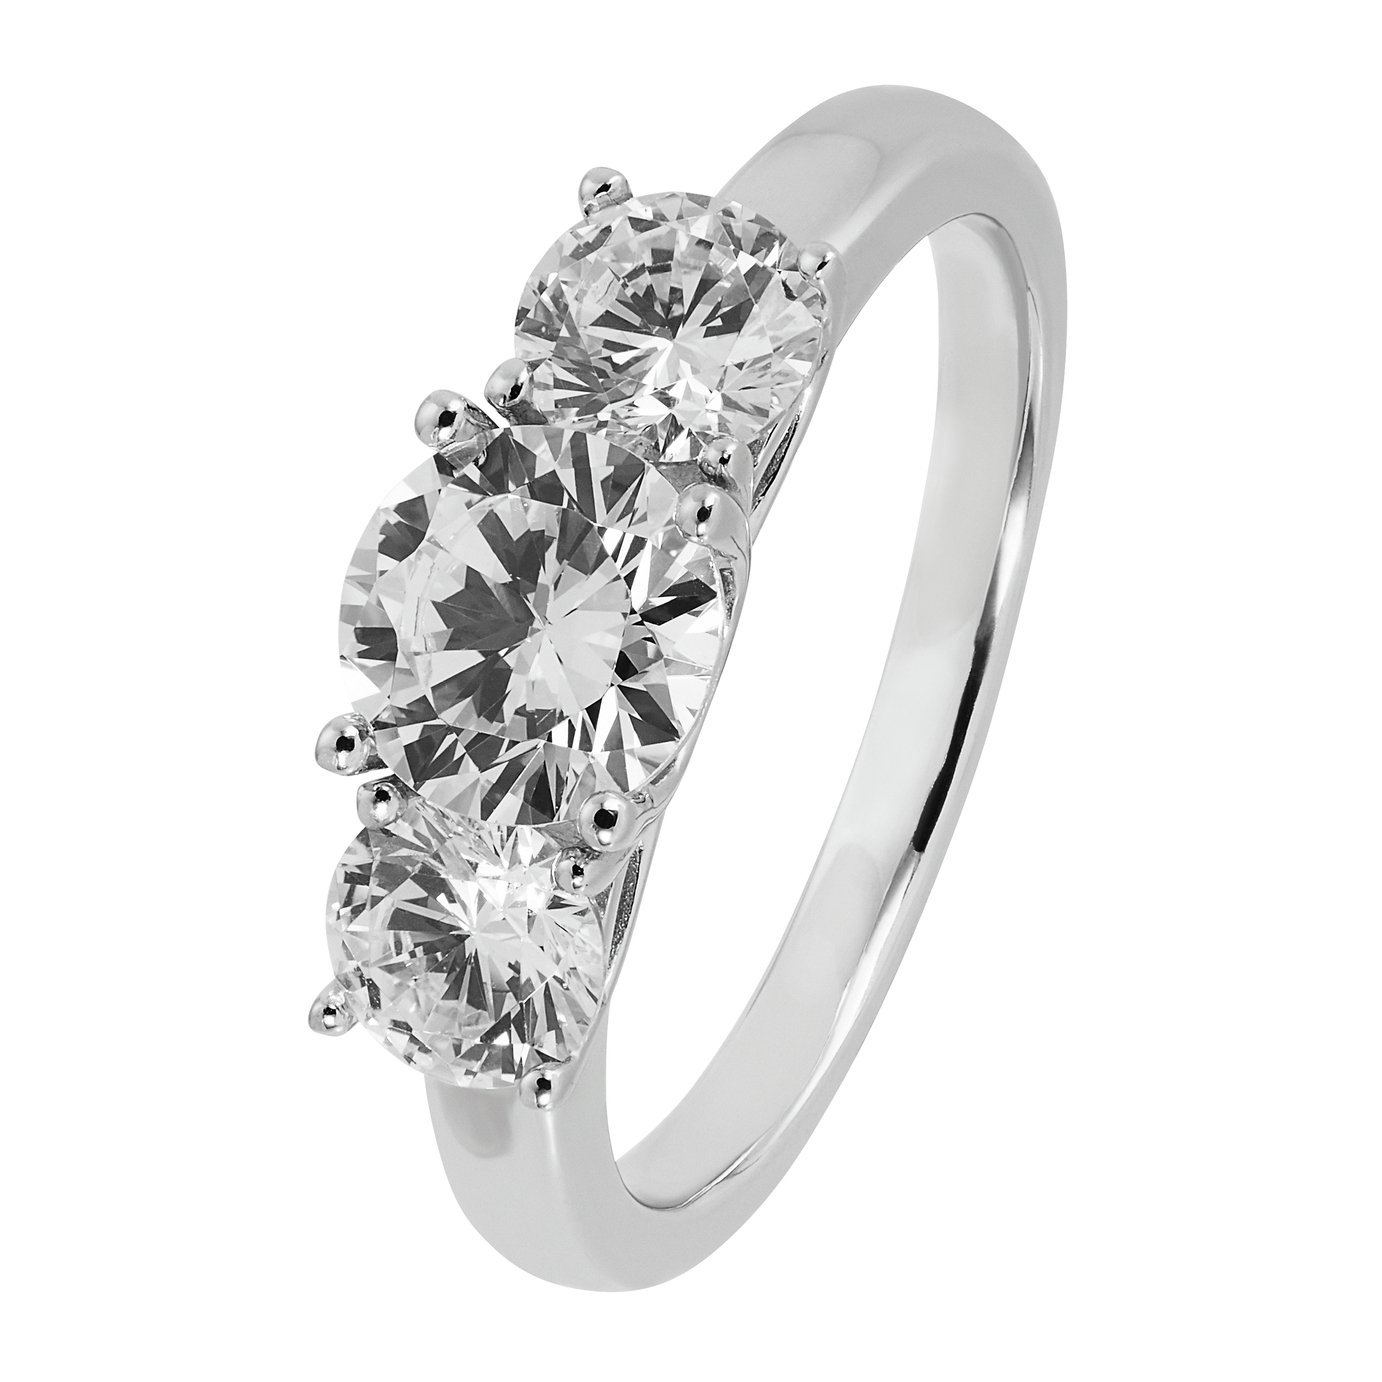 Revere Sterling Silver Round Cubic Zirconia Wedding Ring - L